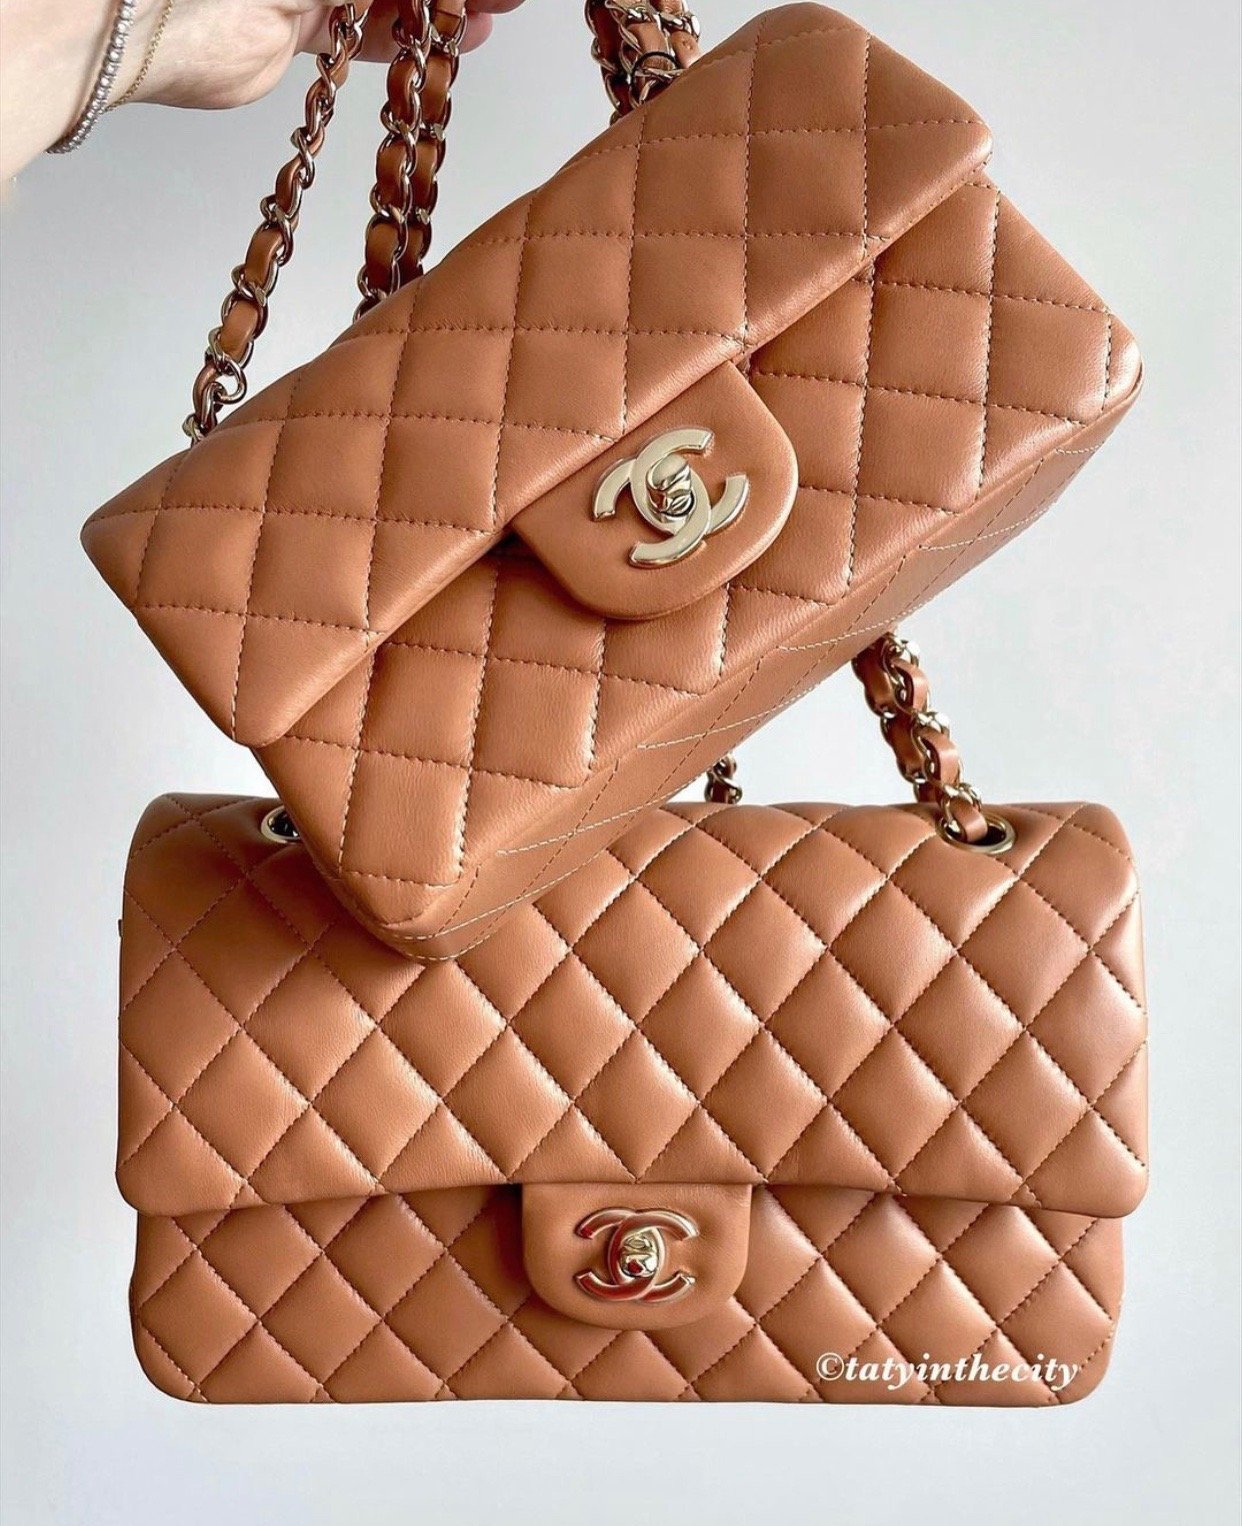 The Chanel Caramel 21P Frenzy – The Race for the Classic Flap is